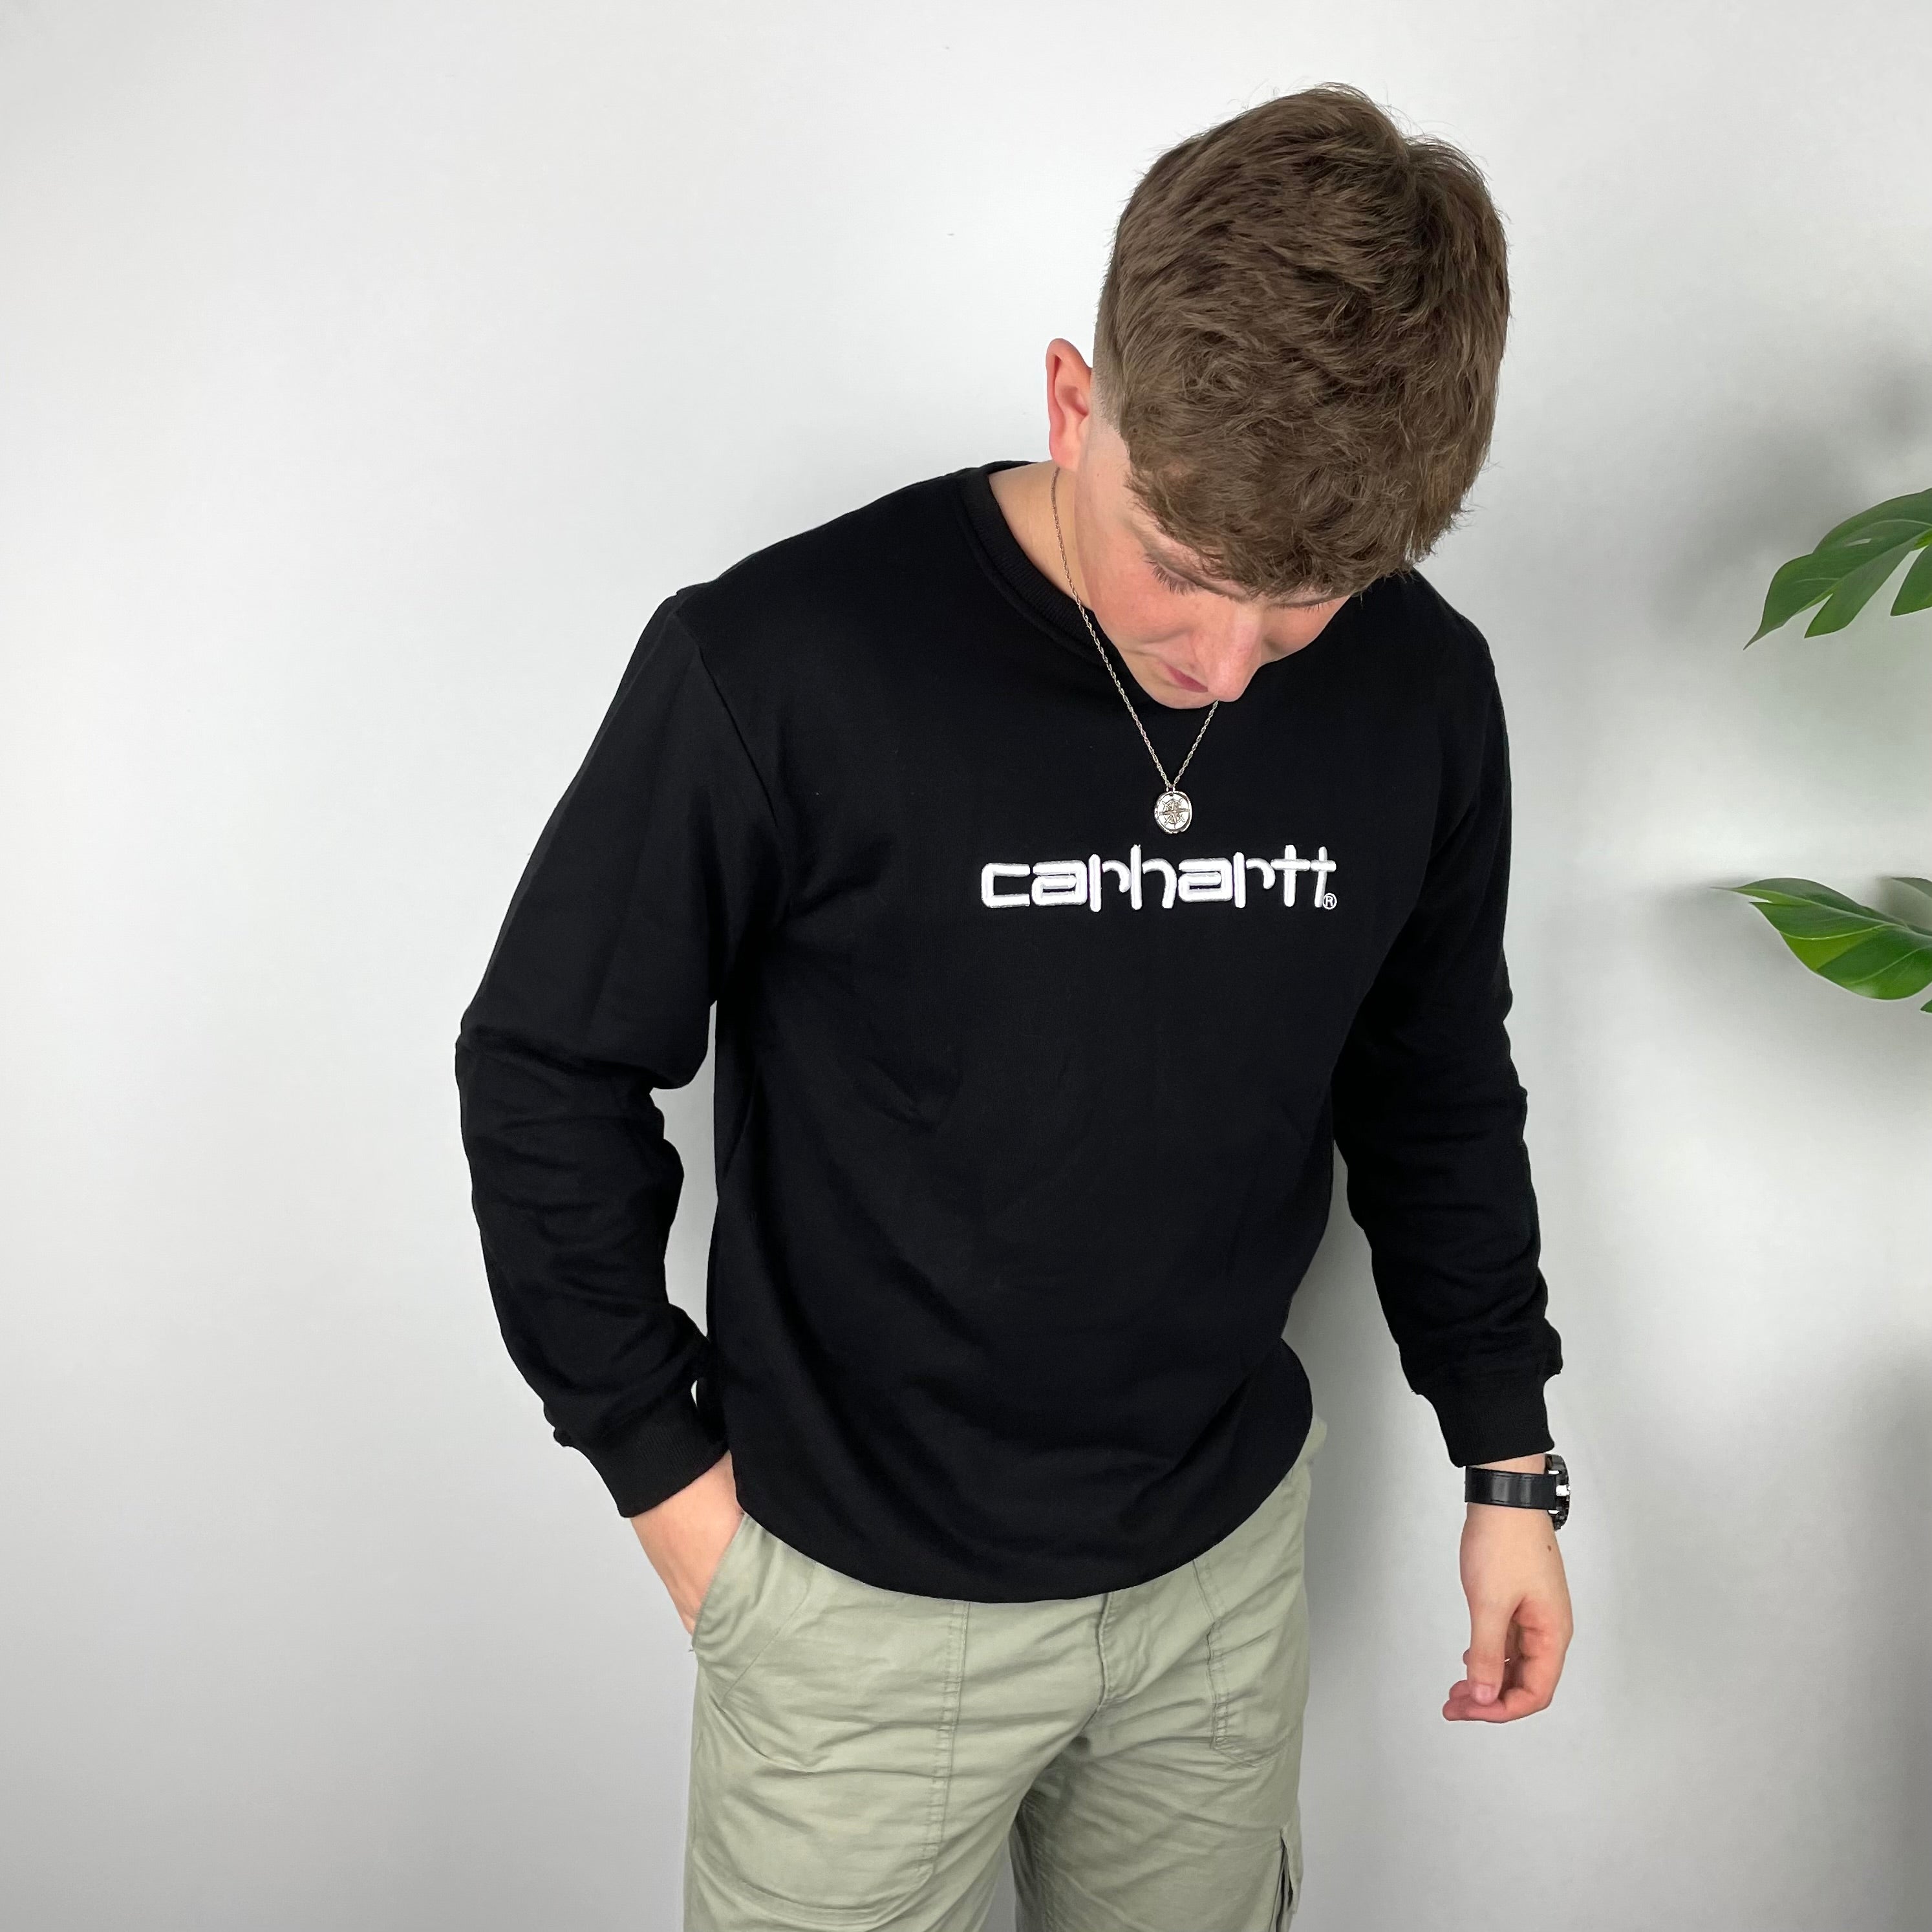 Carhartt RARE Black Embroidered Spell Out Sweatshirt (XL)